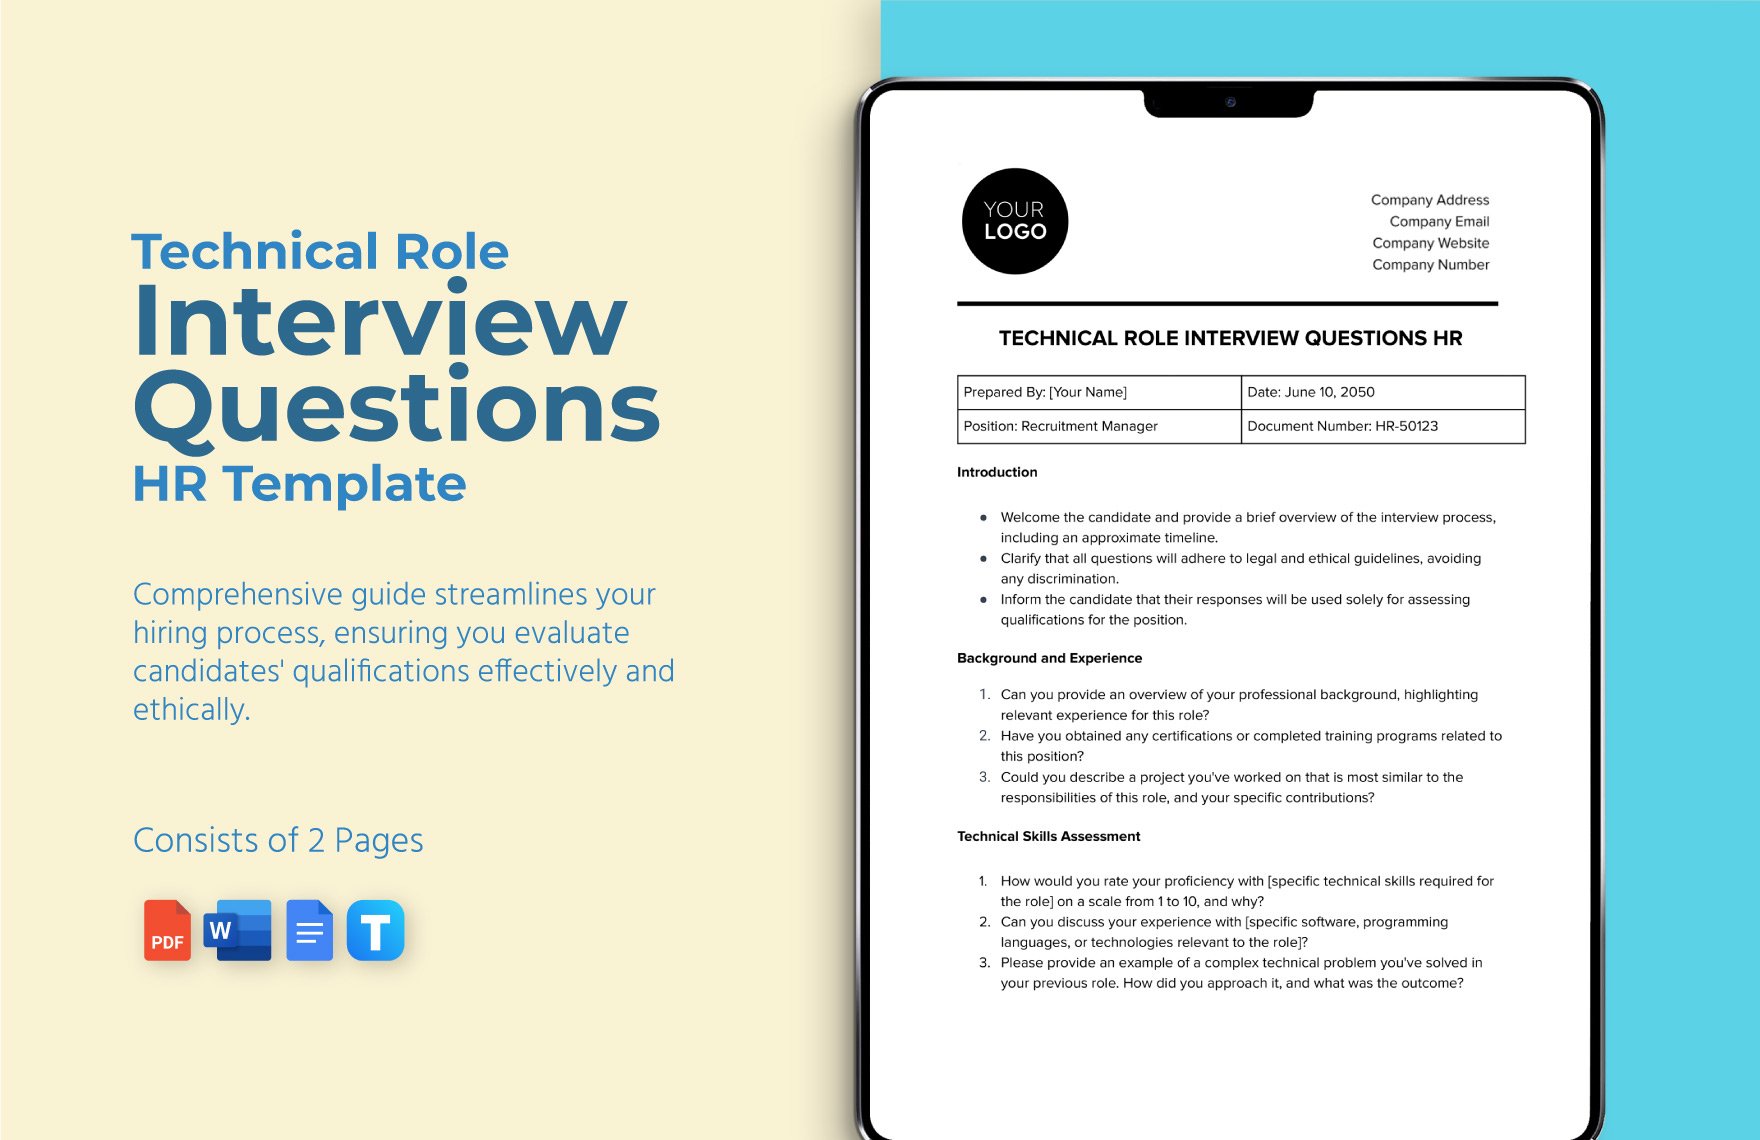 Technical Role Interview Questions HR Template in Word, Google Docs, PDF